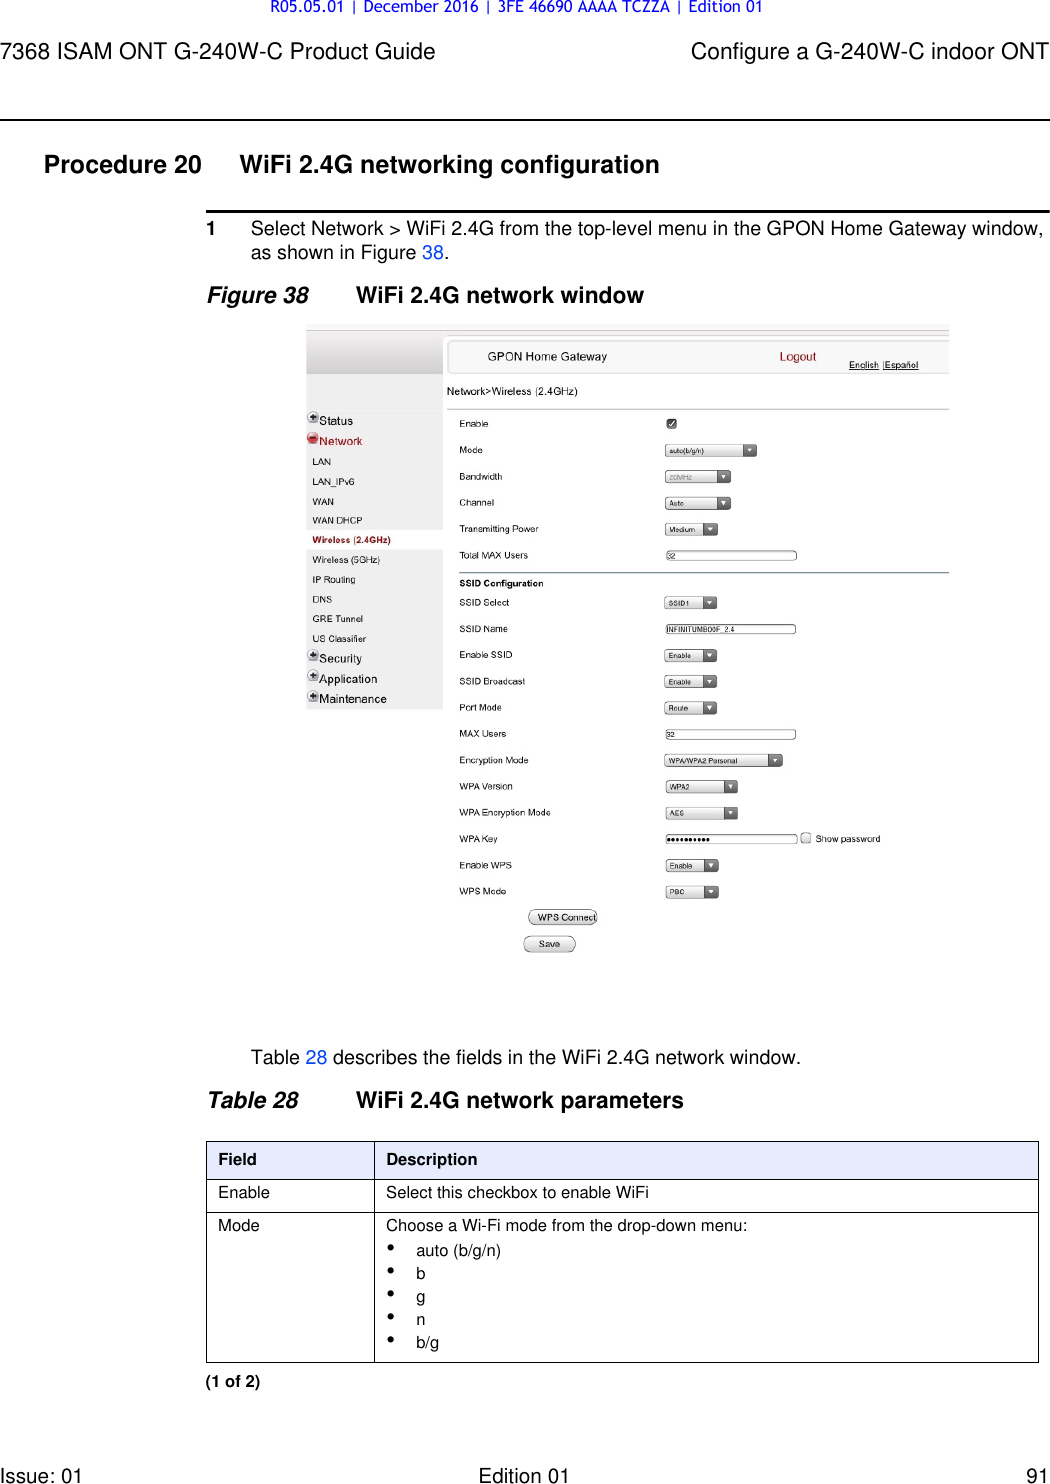 Page 91 of Nokia Bell G240W-C GPON ONU User Manual 7368 ISAM ONT G 240W B Product Guide